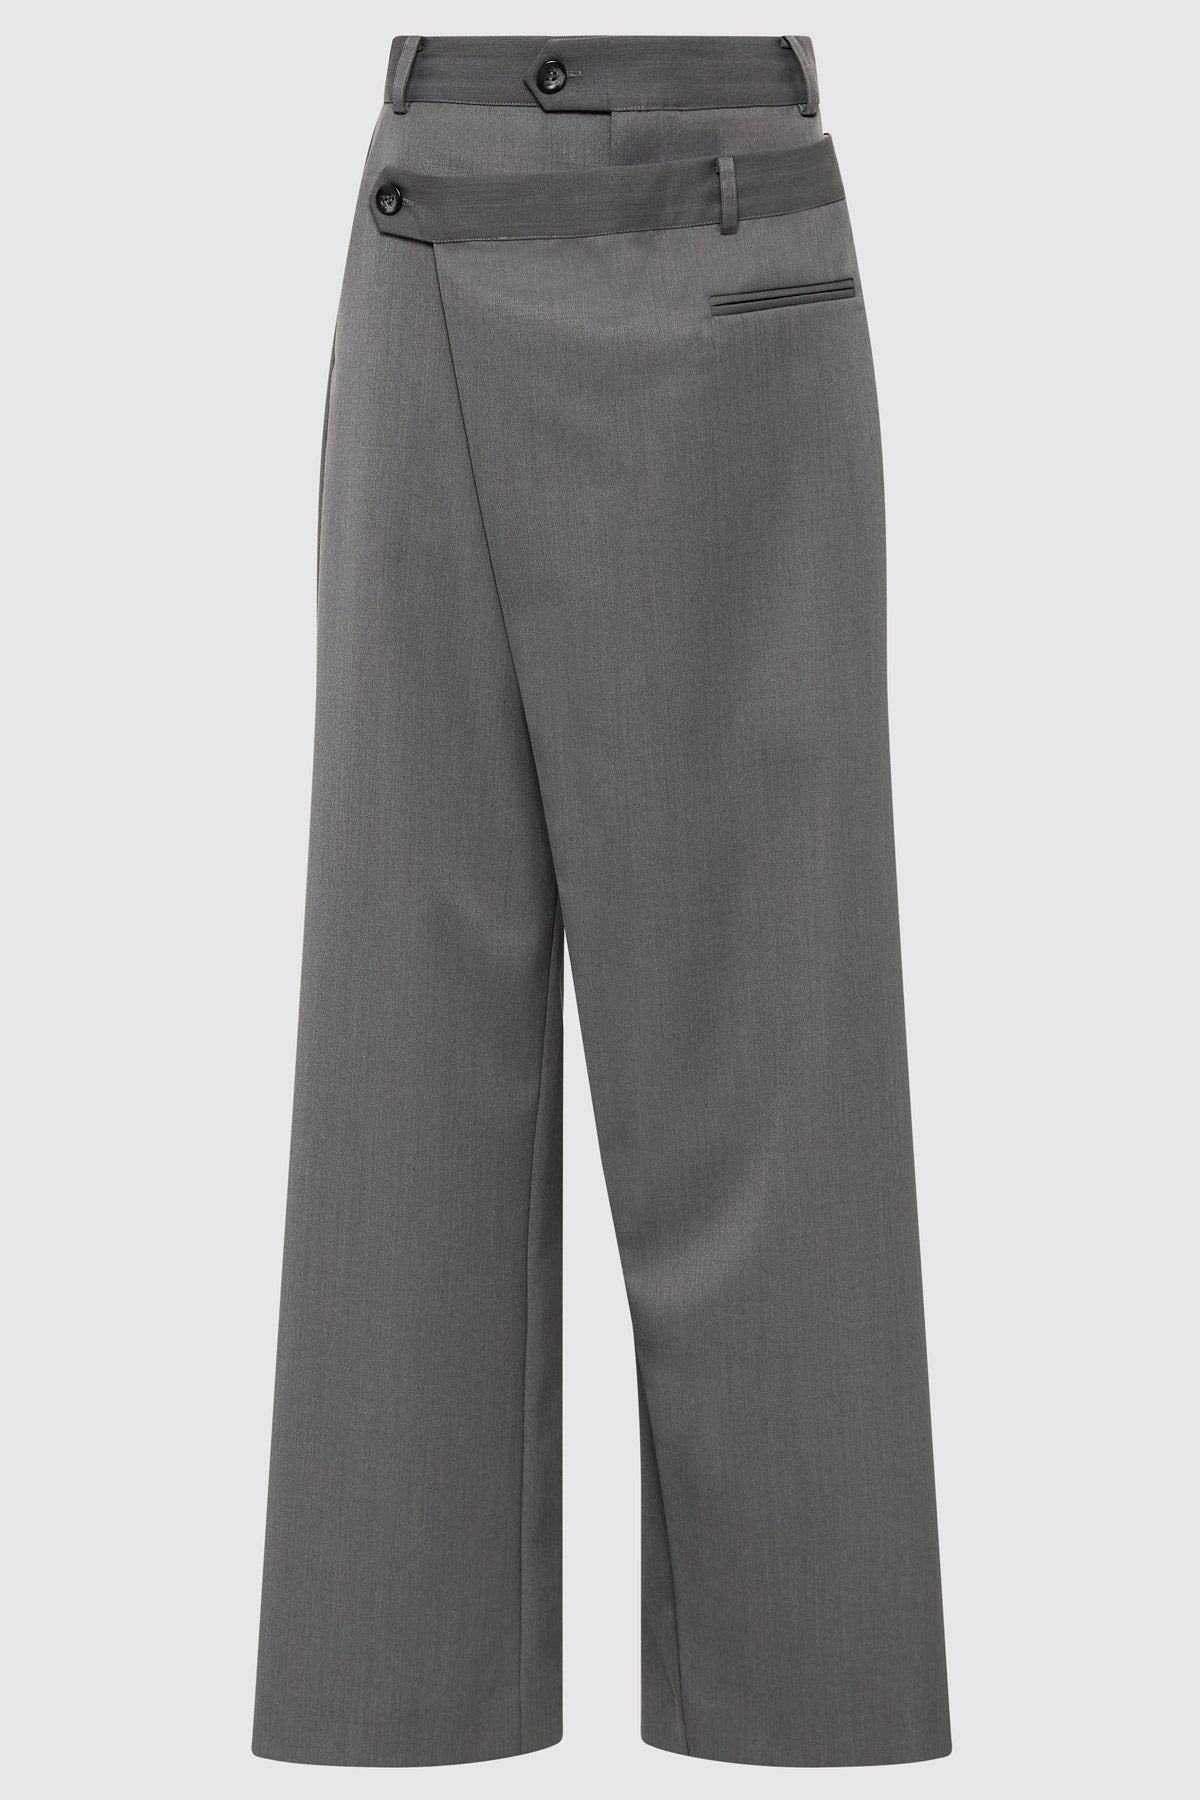 Deconstructed Waist Pants - Pewter Grey